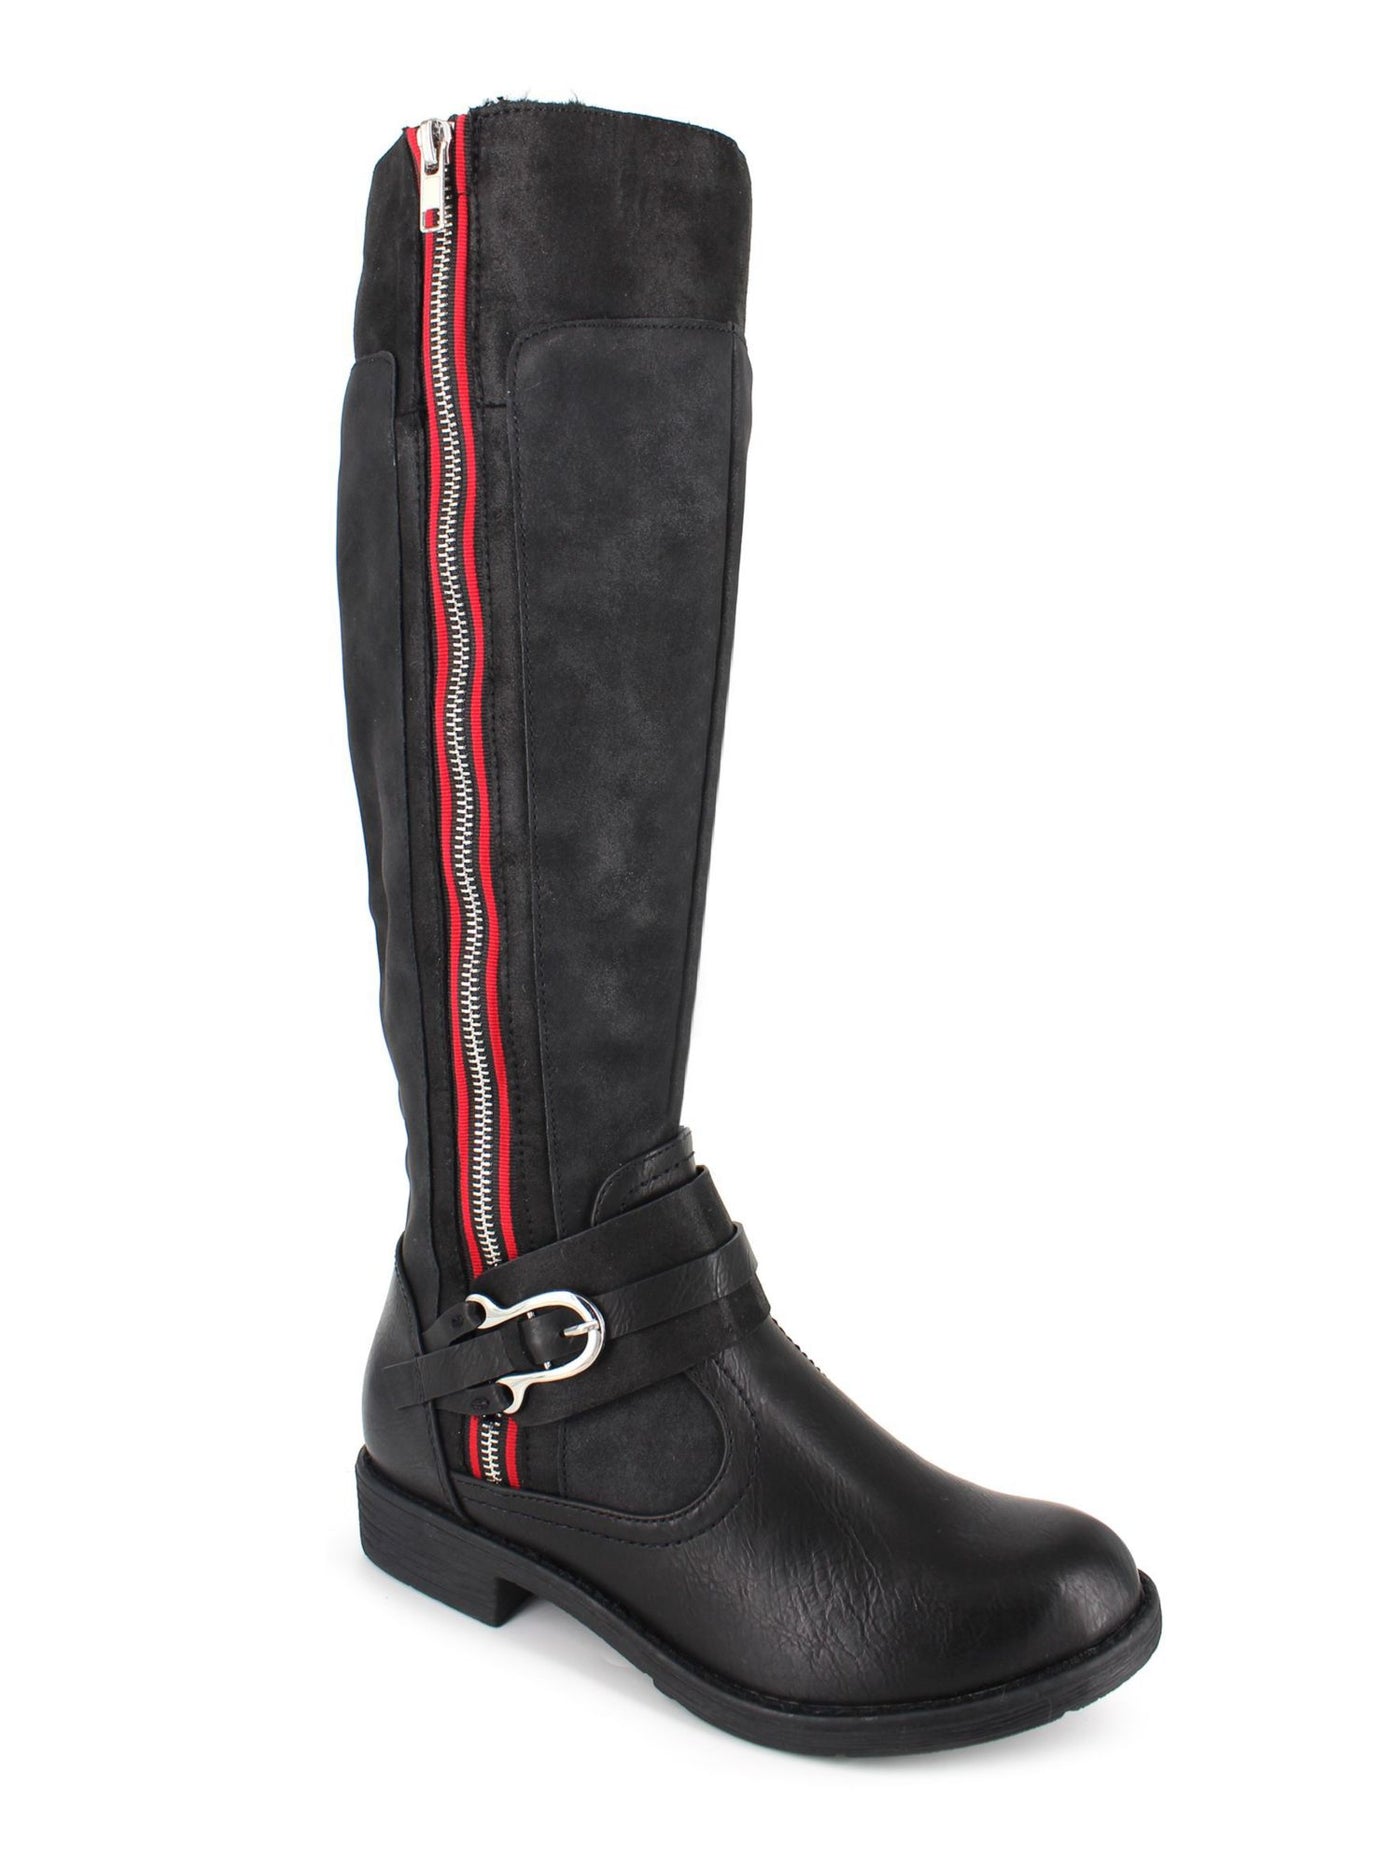 ZIGI SOHO Womens Black Faux Firm Trim Accent Stripes Buckle Accent Zipper Accent Stephany Round Toe Block Heel Zip-Up Riding Boot 7.5 M